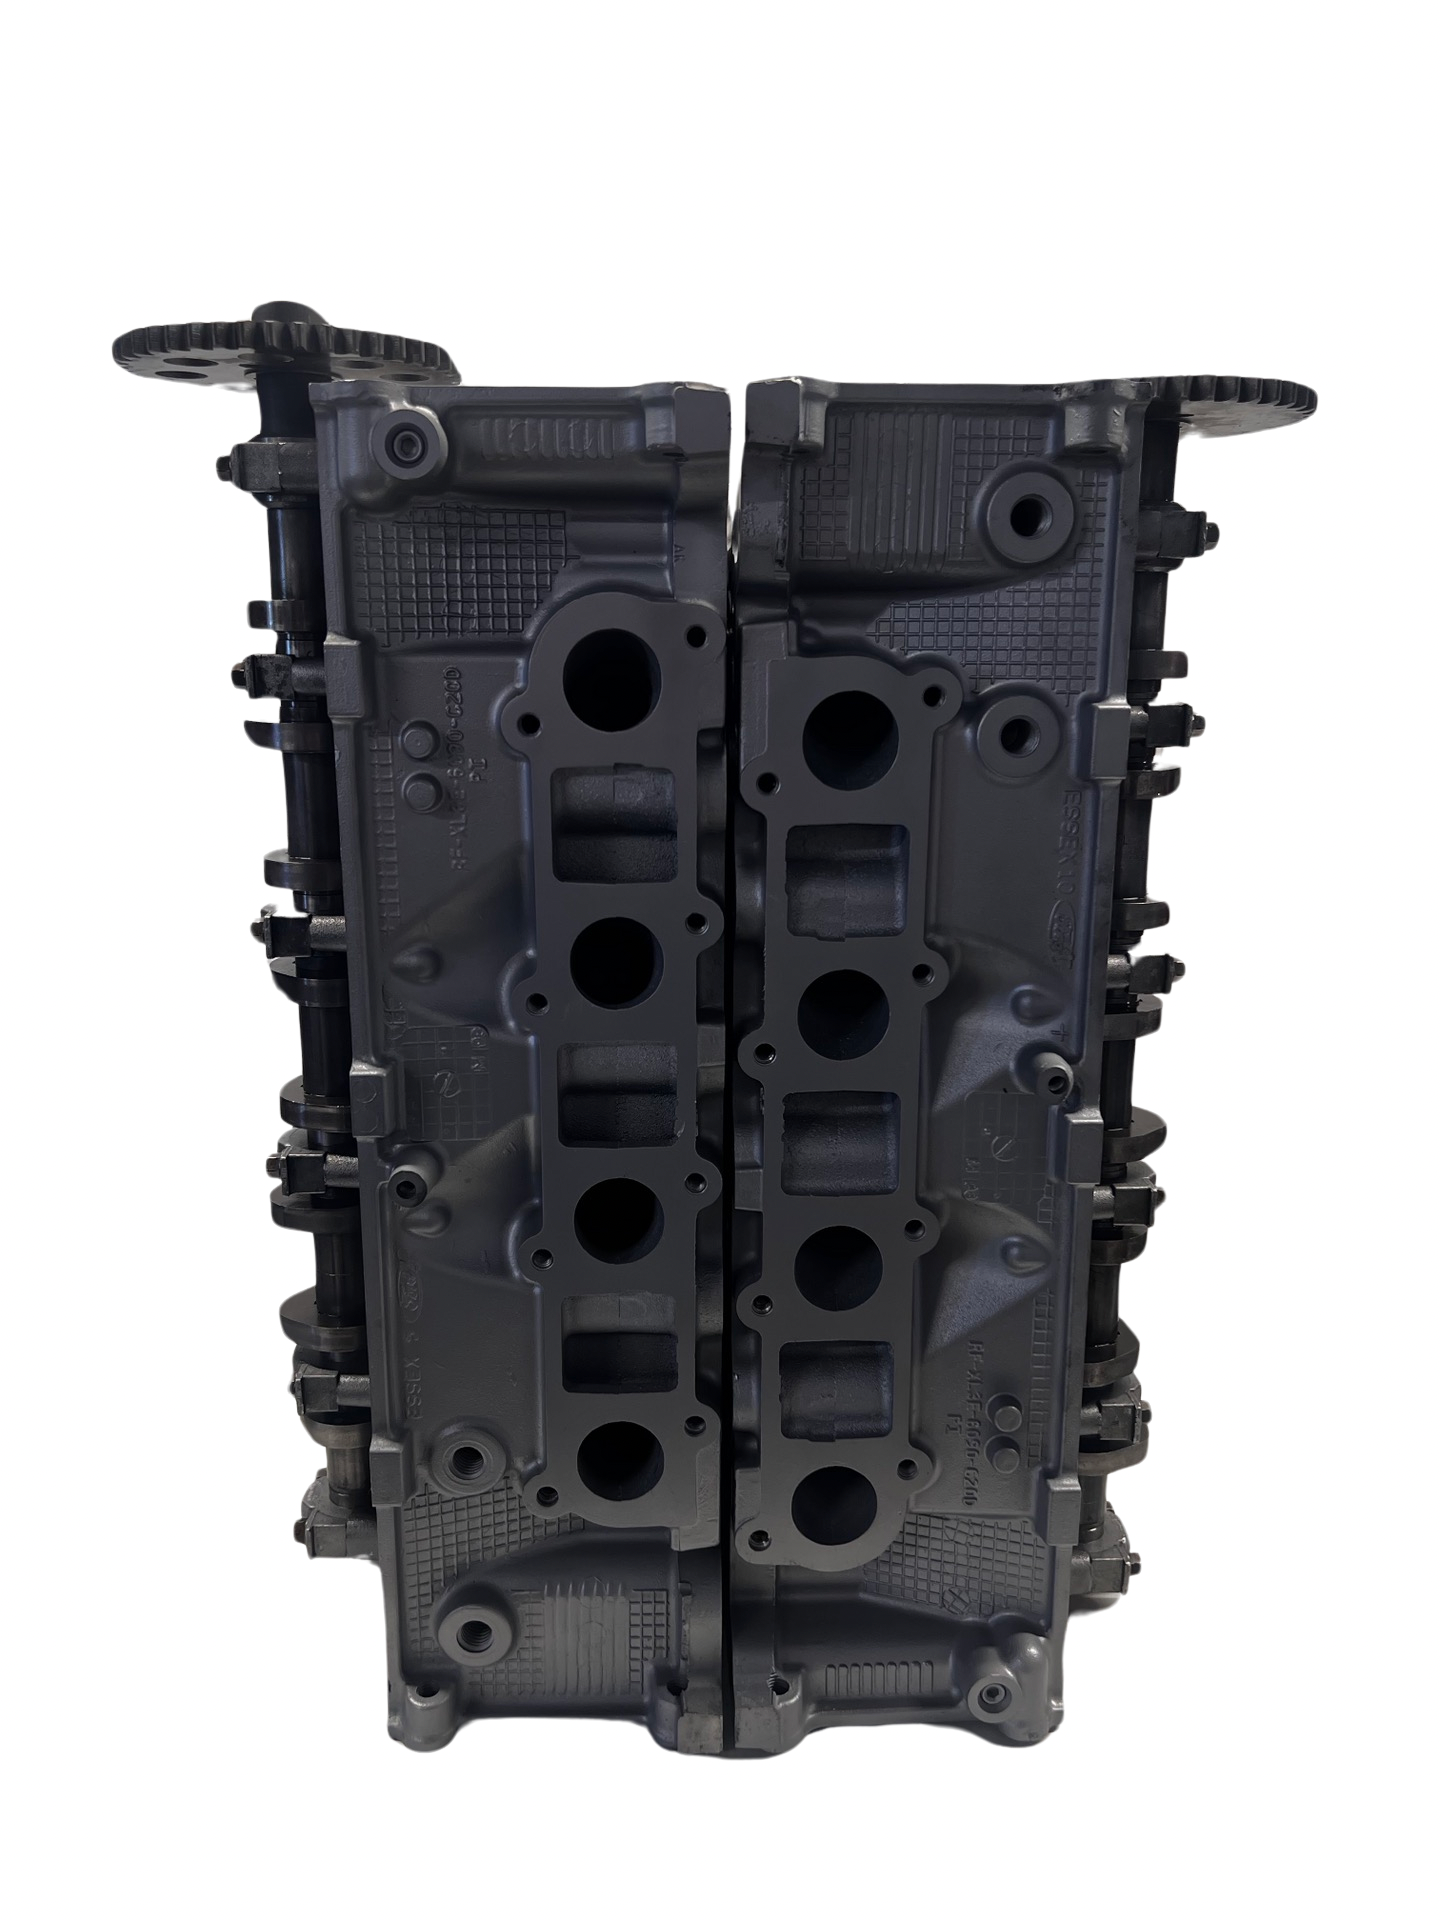 Intake side of cylinder heads for a Ford 5.4L Casting #XL3E (SOLD IN PAIR)